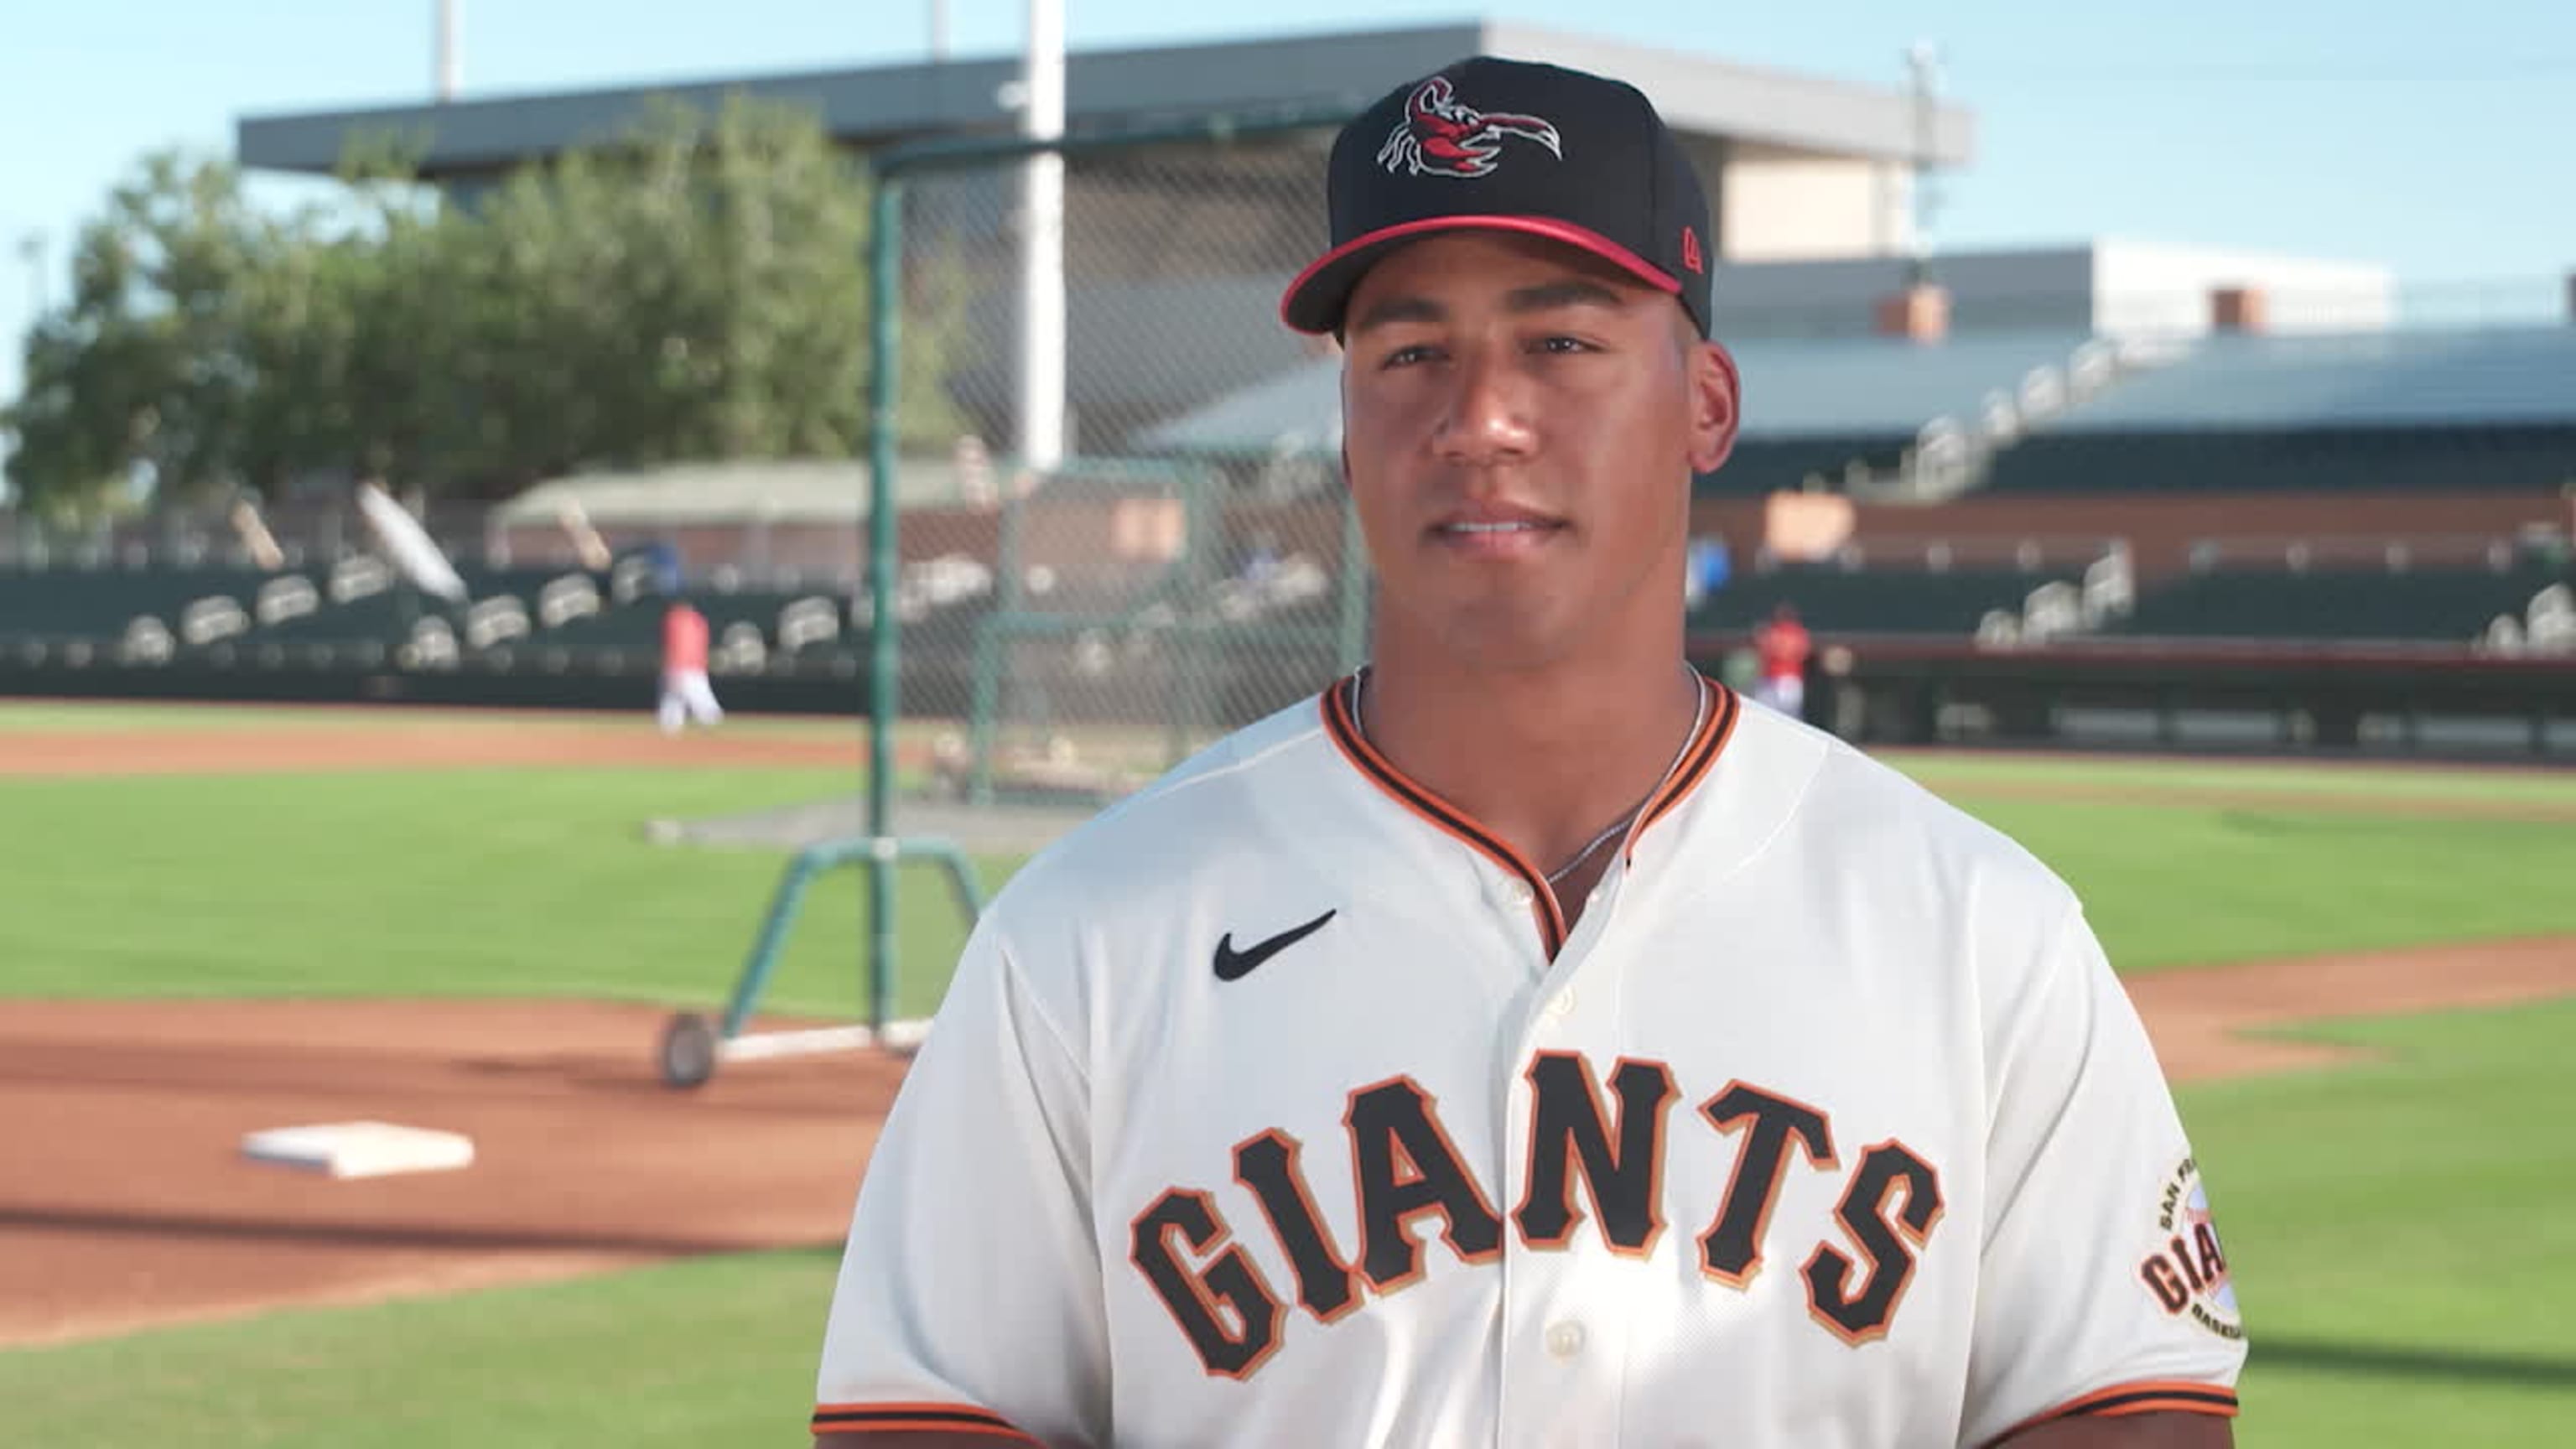 San Francisco Giants opens state-of-the-art player training and